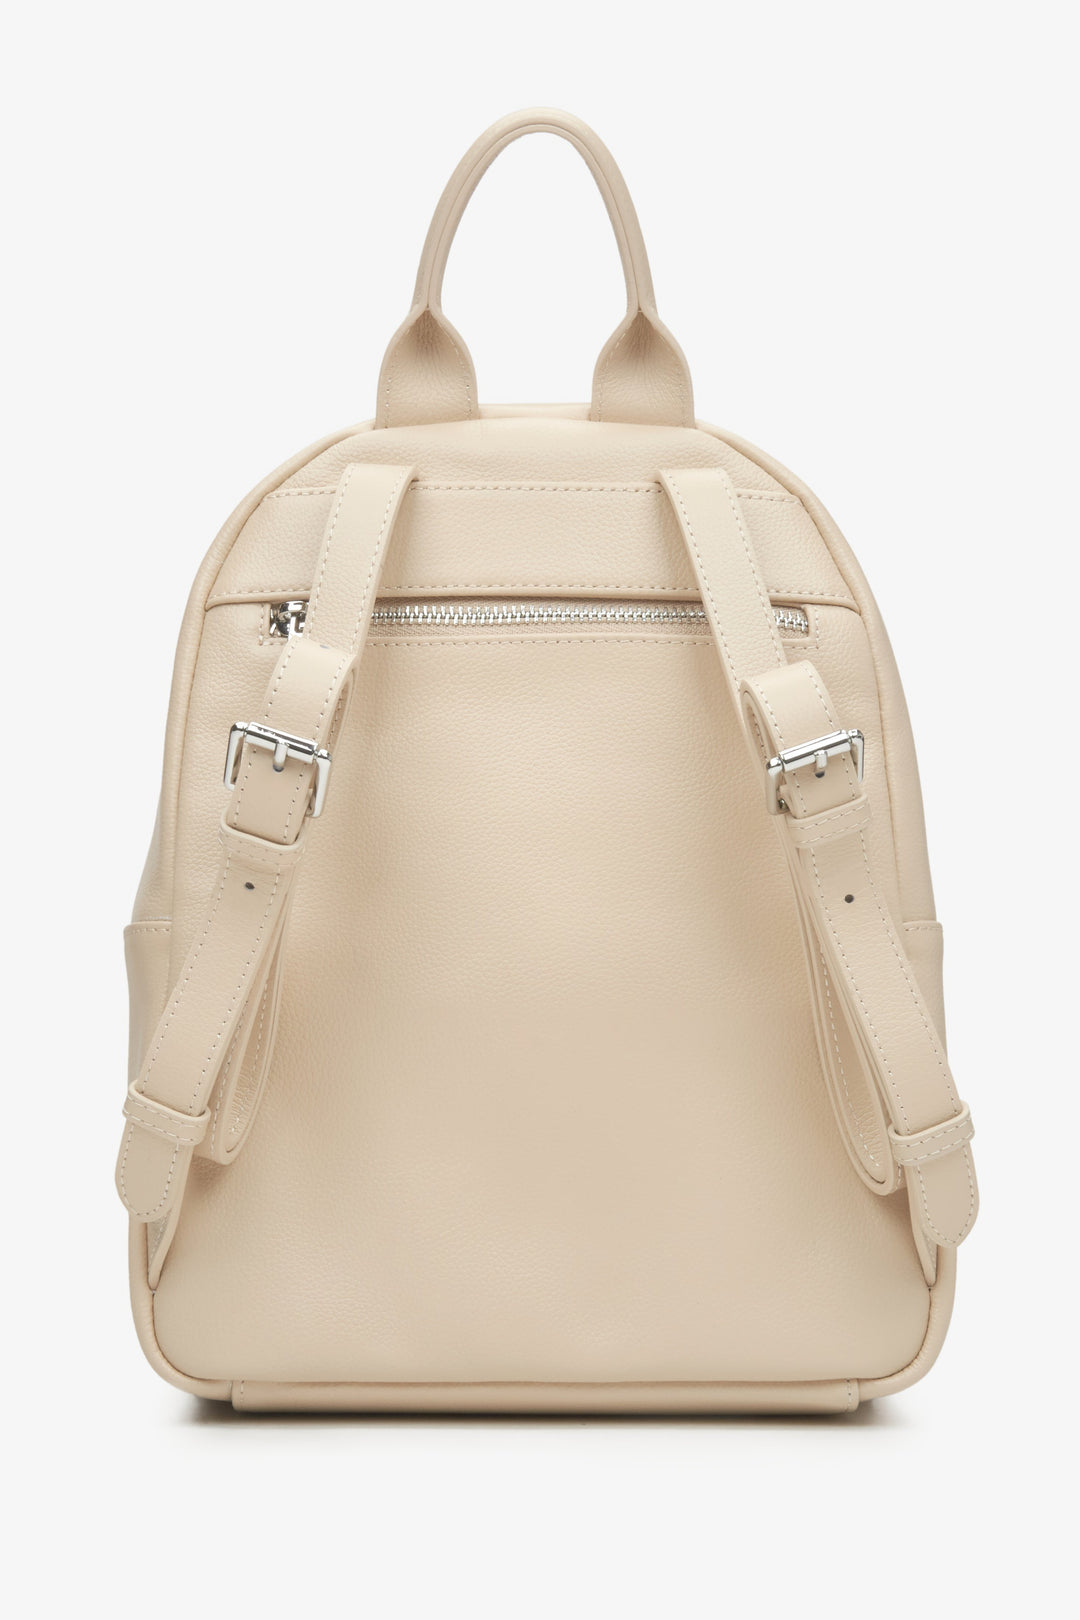 Women's light beige leather backpack with long straps by Estro - back view.